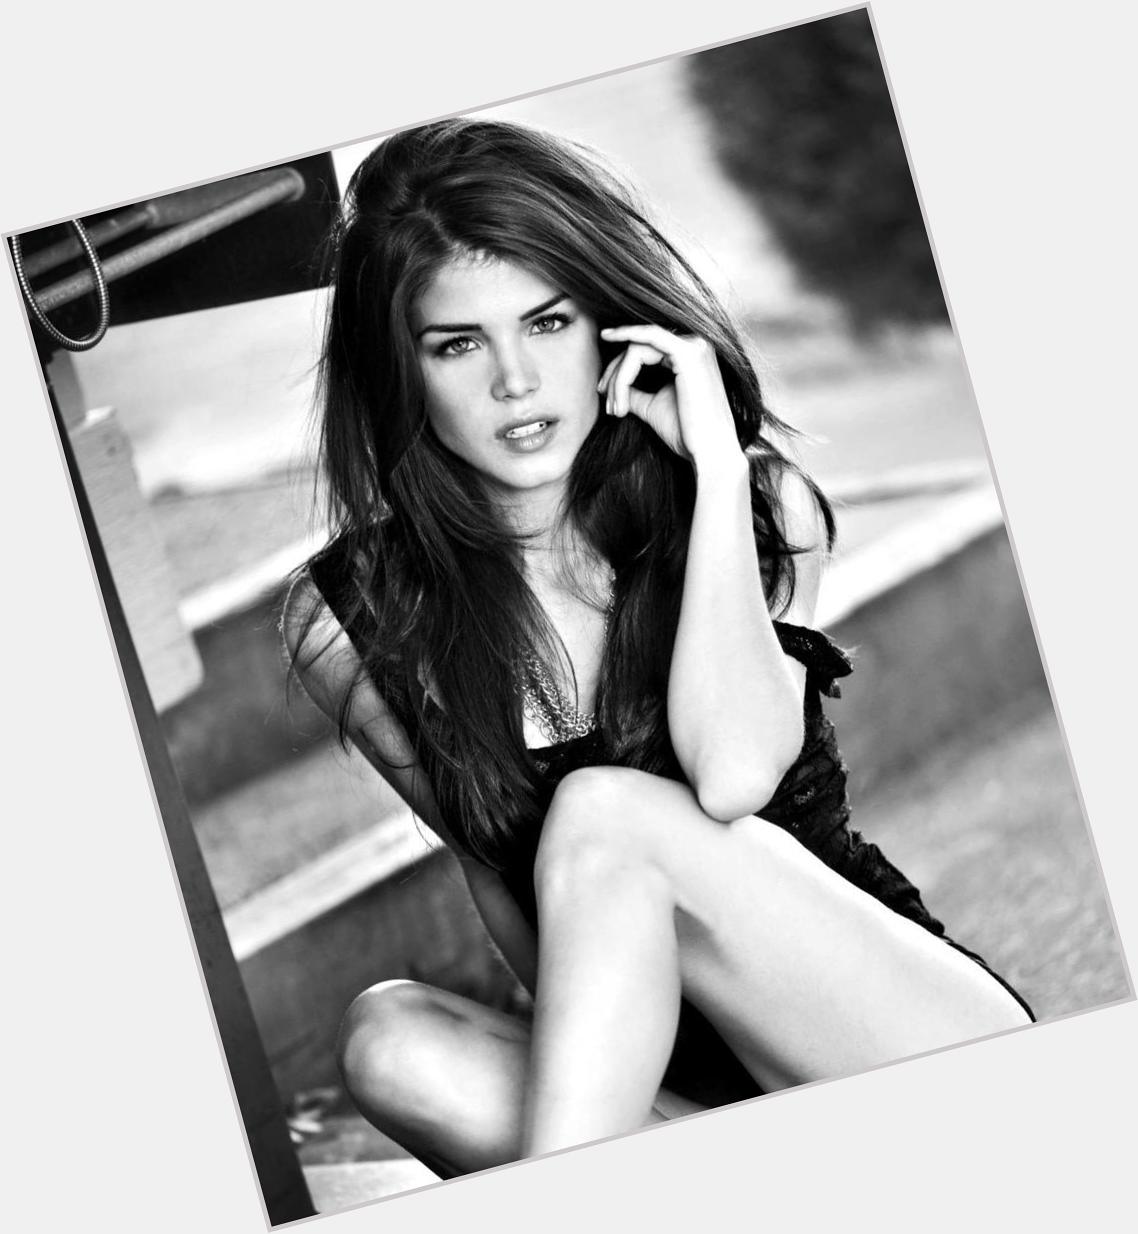 Happy birthday to an amazing beautiful outstanding actress I named Marie Avgeropoulos  